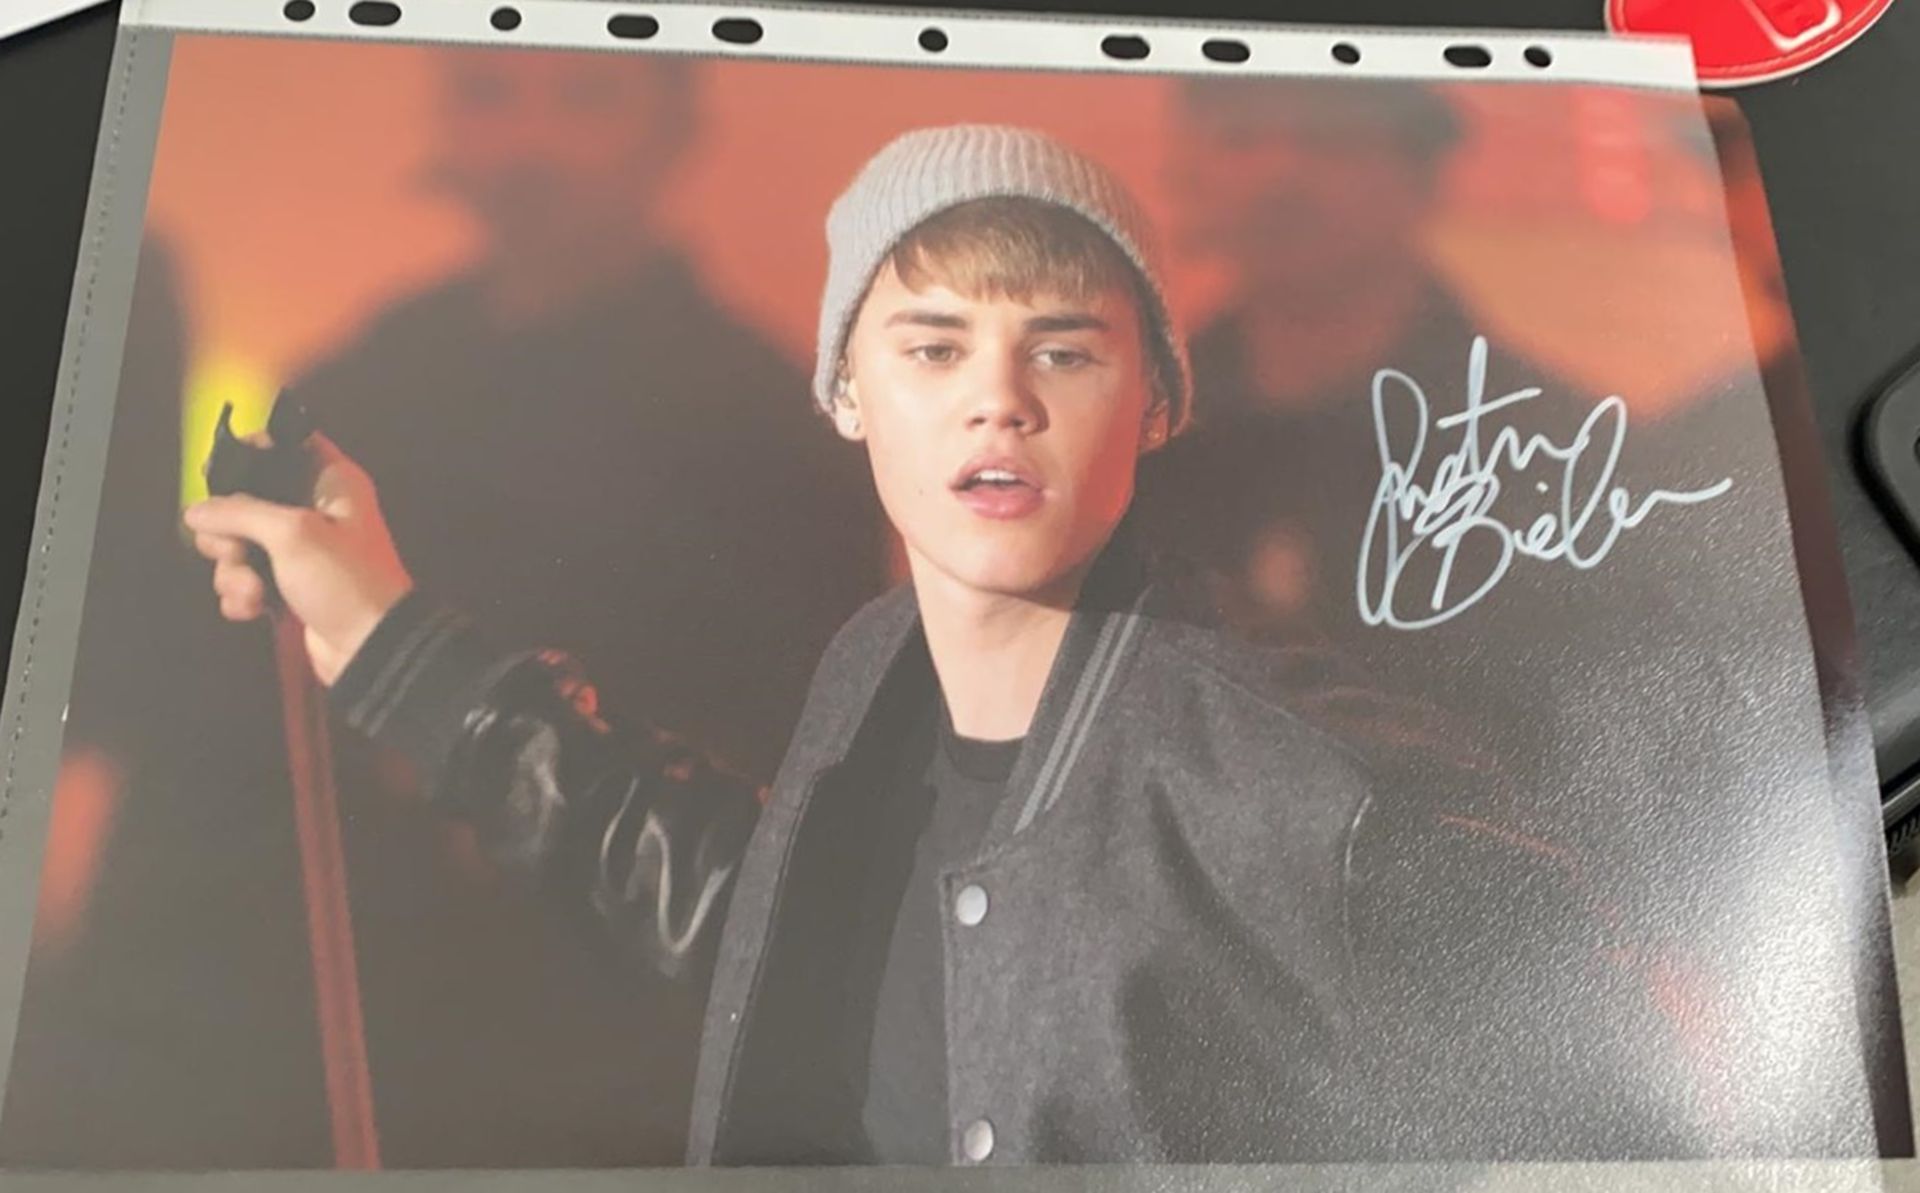 1 x Signed Autograph Picture - JUSTIN BIEBER - With COA - Size 12 x 8 Inch - NO VAT ON THE HAMMER - Image 2 of 4